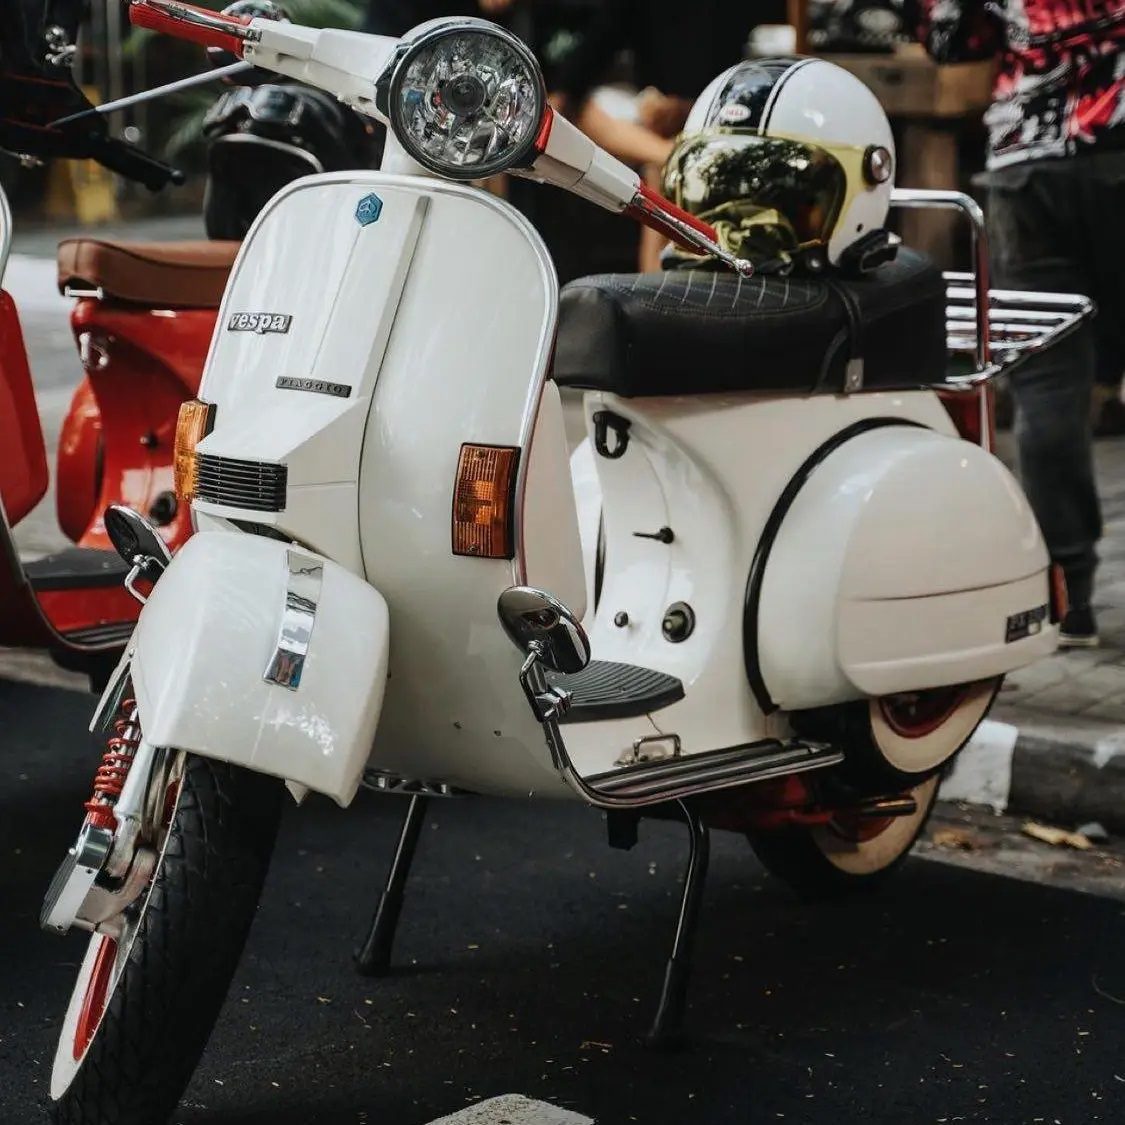 White Vespa PX classic

Hashtag and mention @vespapxnet for feature repost
Check website www.vespapx.net for more 

@2strokefolk